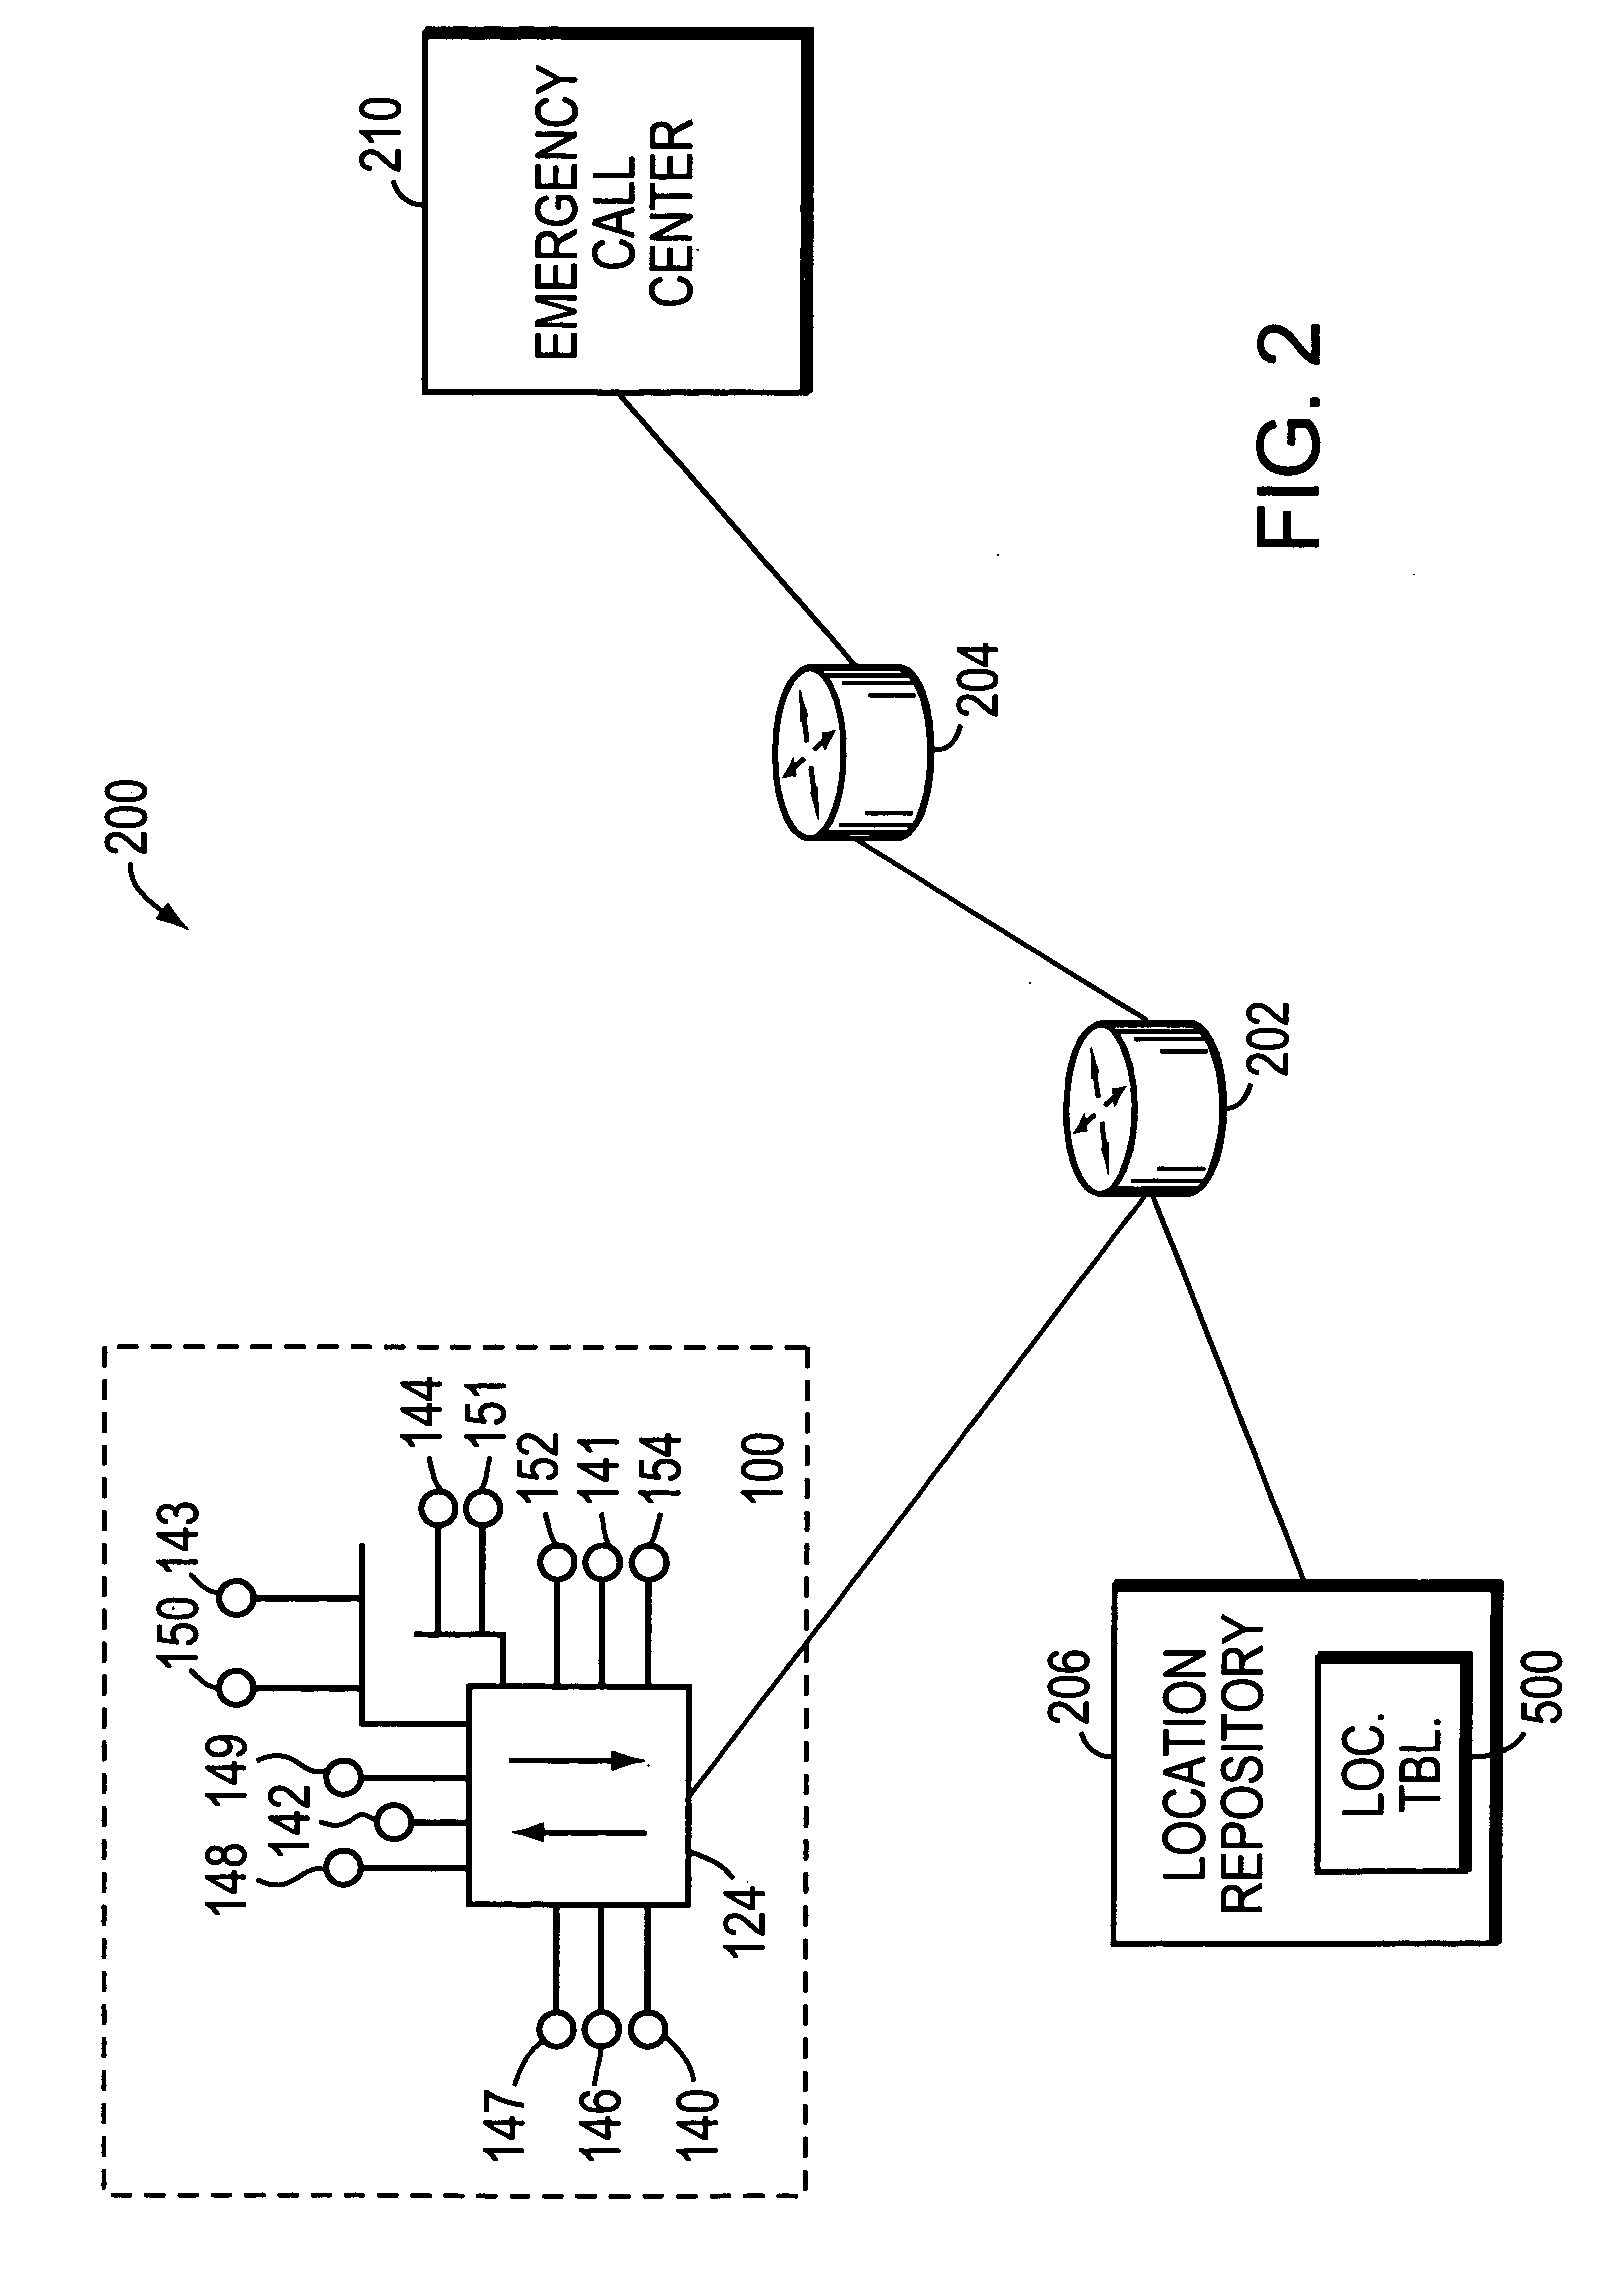 System for dynamically tracking the location of network devices to enable emergency services